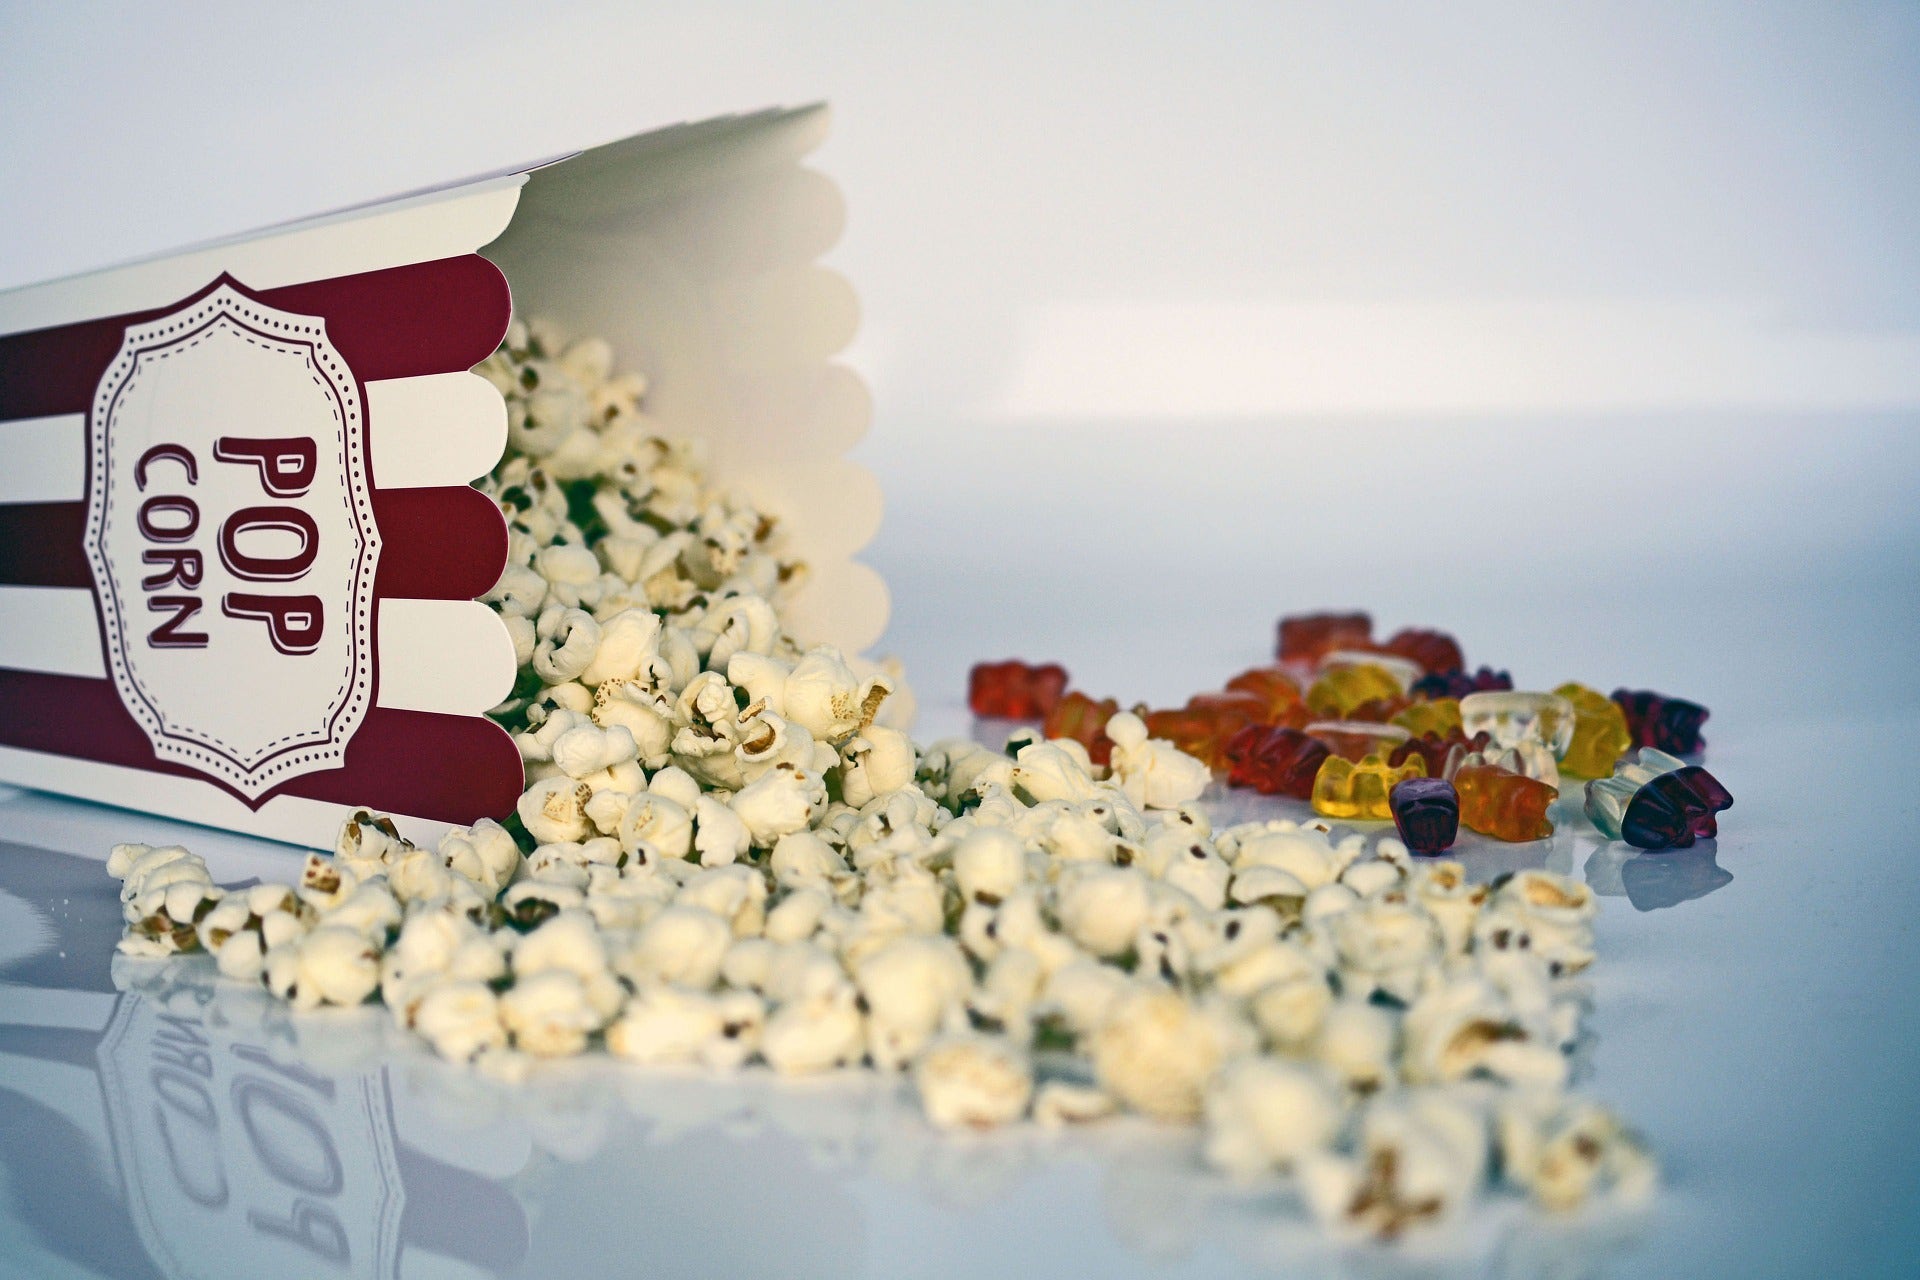 What's Moving AMC And Other Movie Theater Stocks Down?